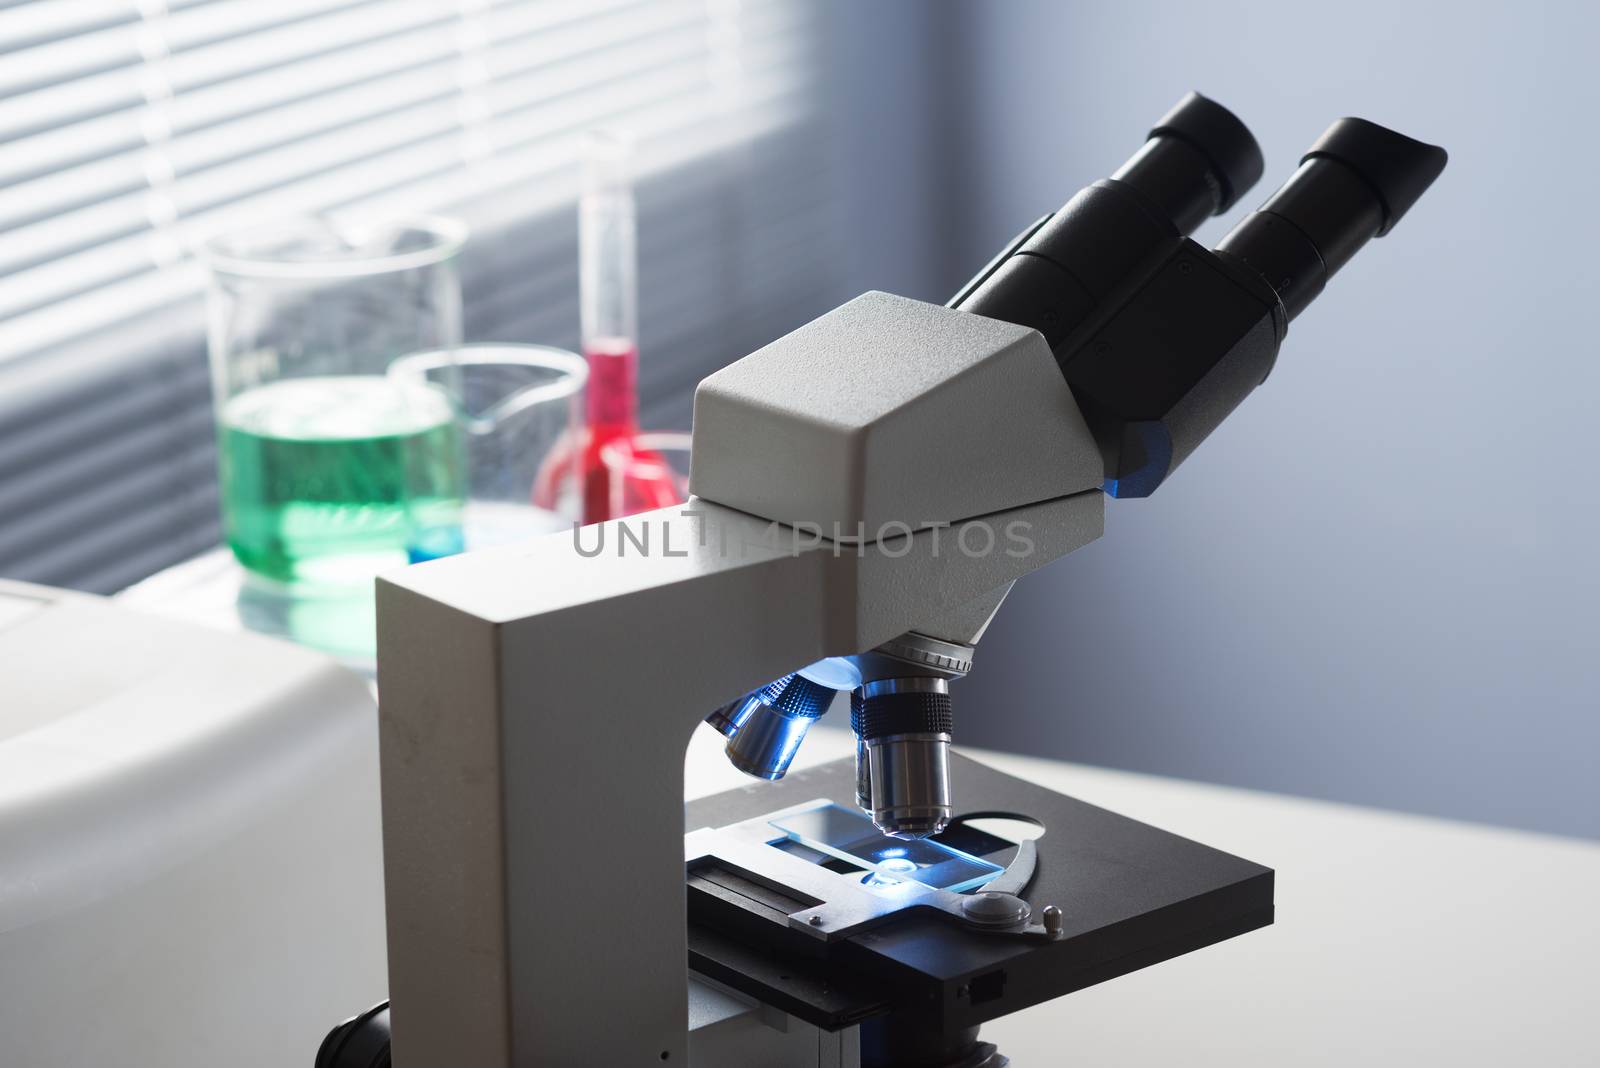 Microscope close-up and laboratory equipment on a desk.